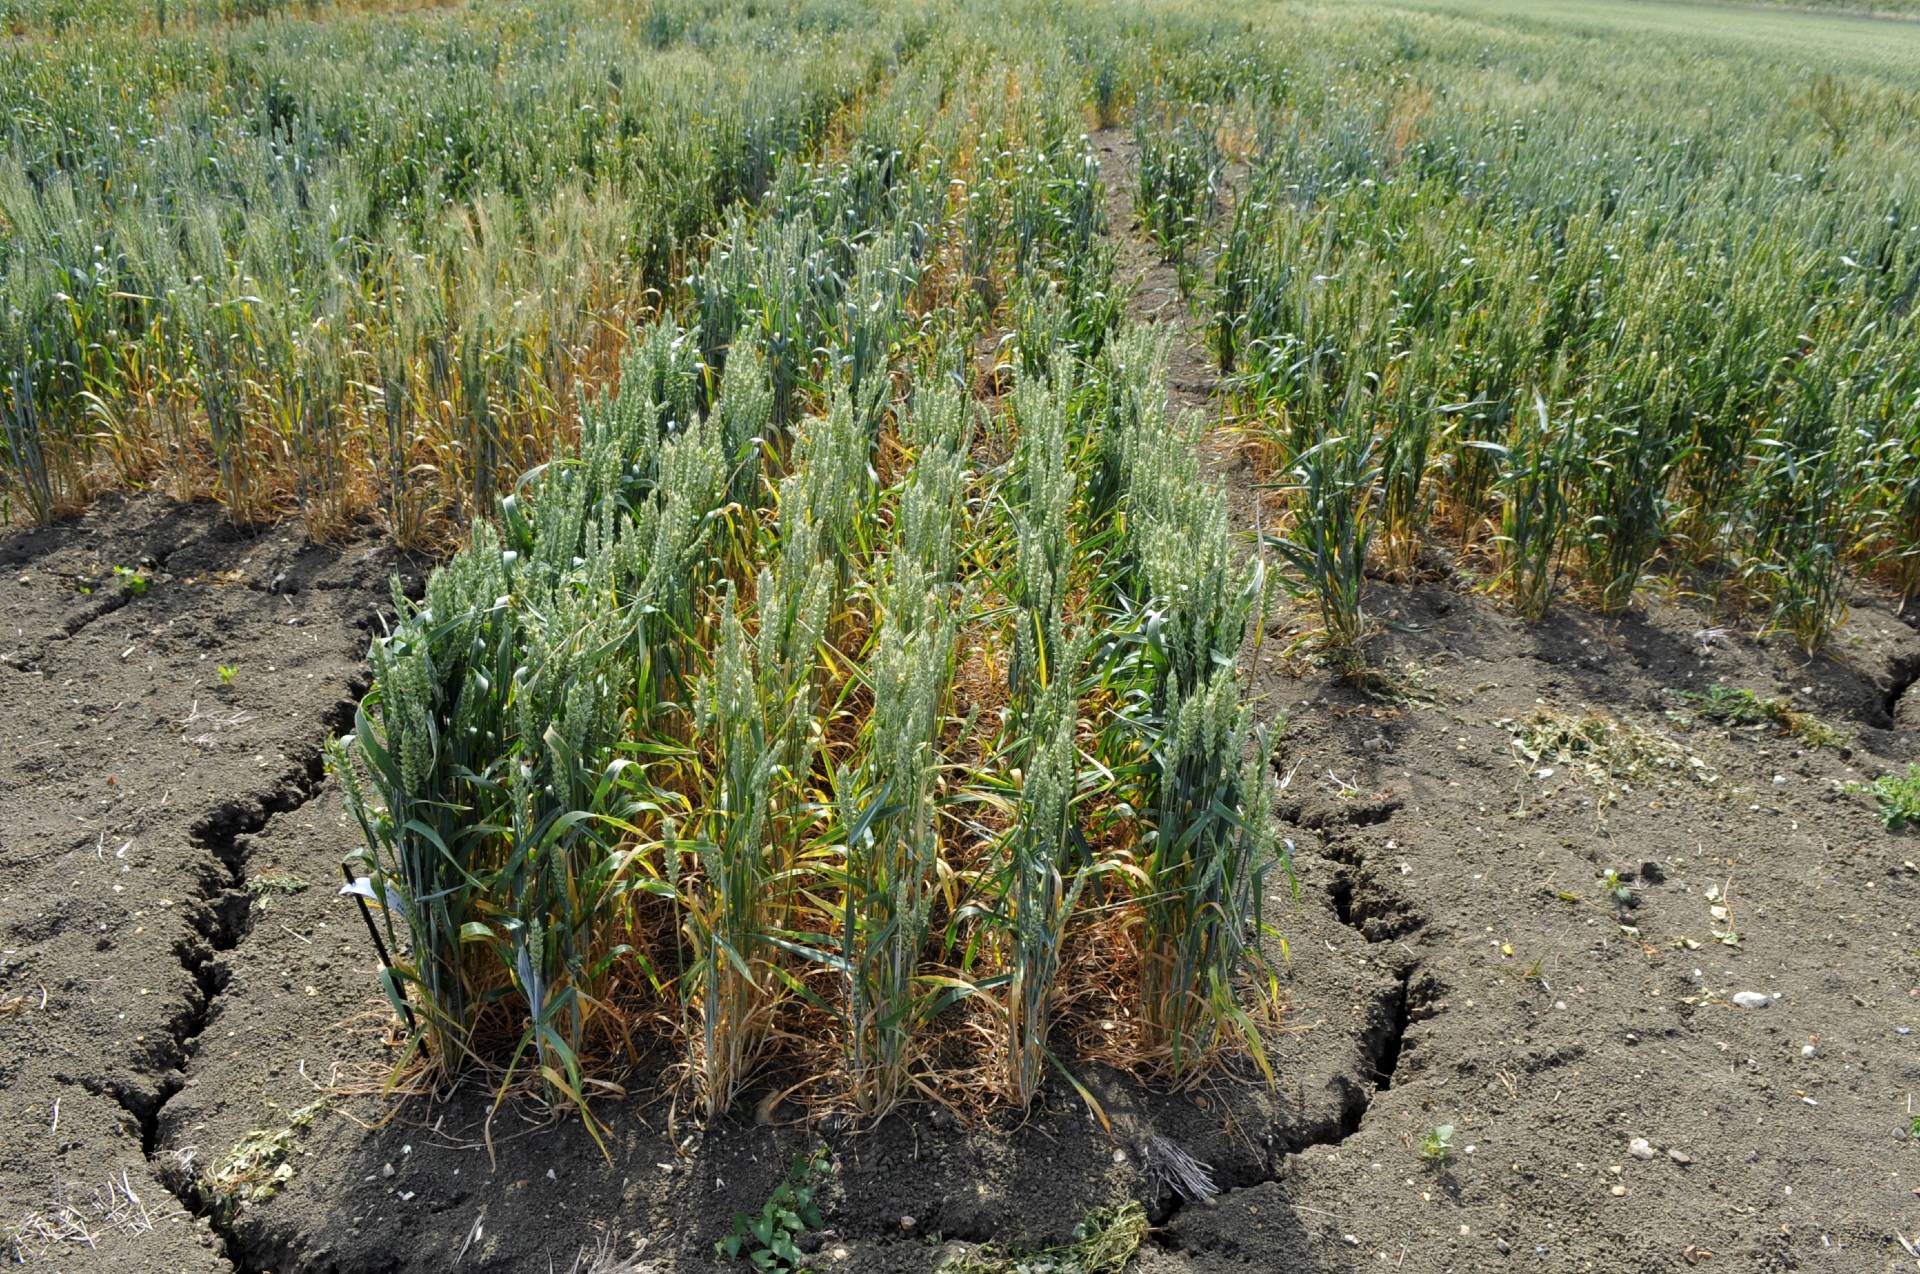 Wheat crop affected by drought